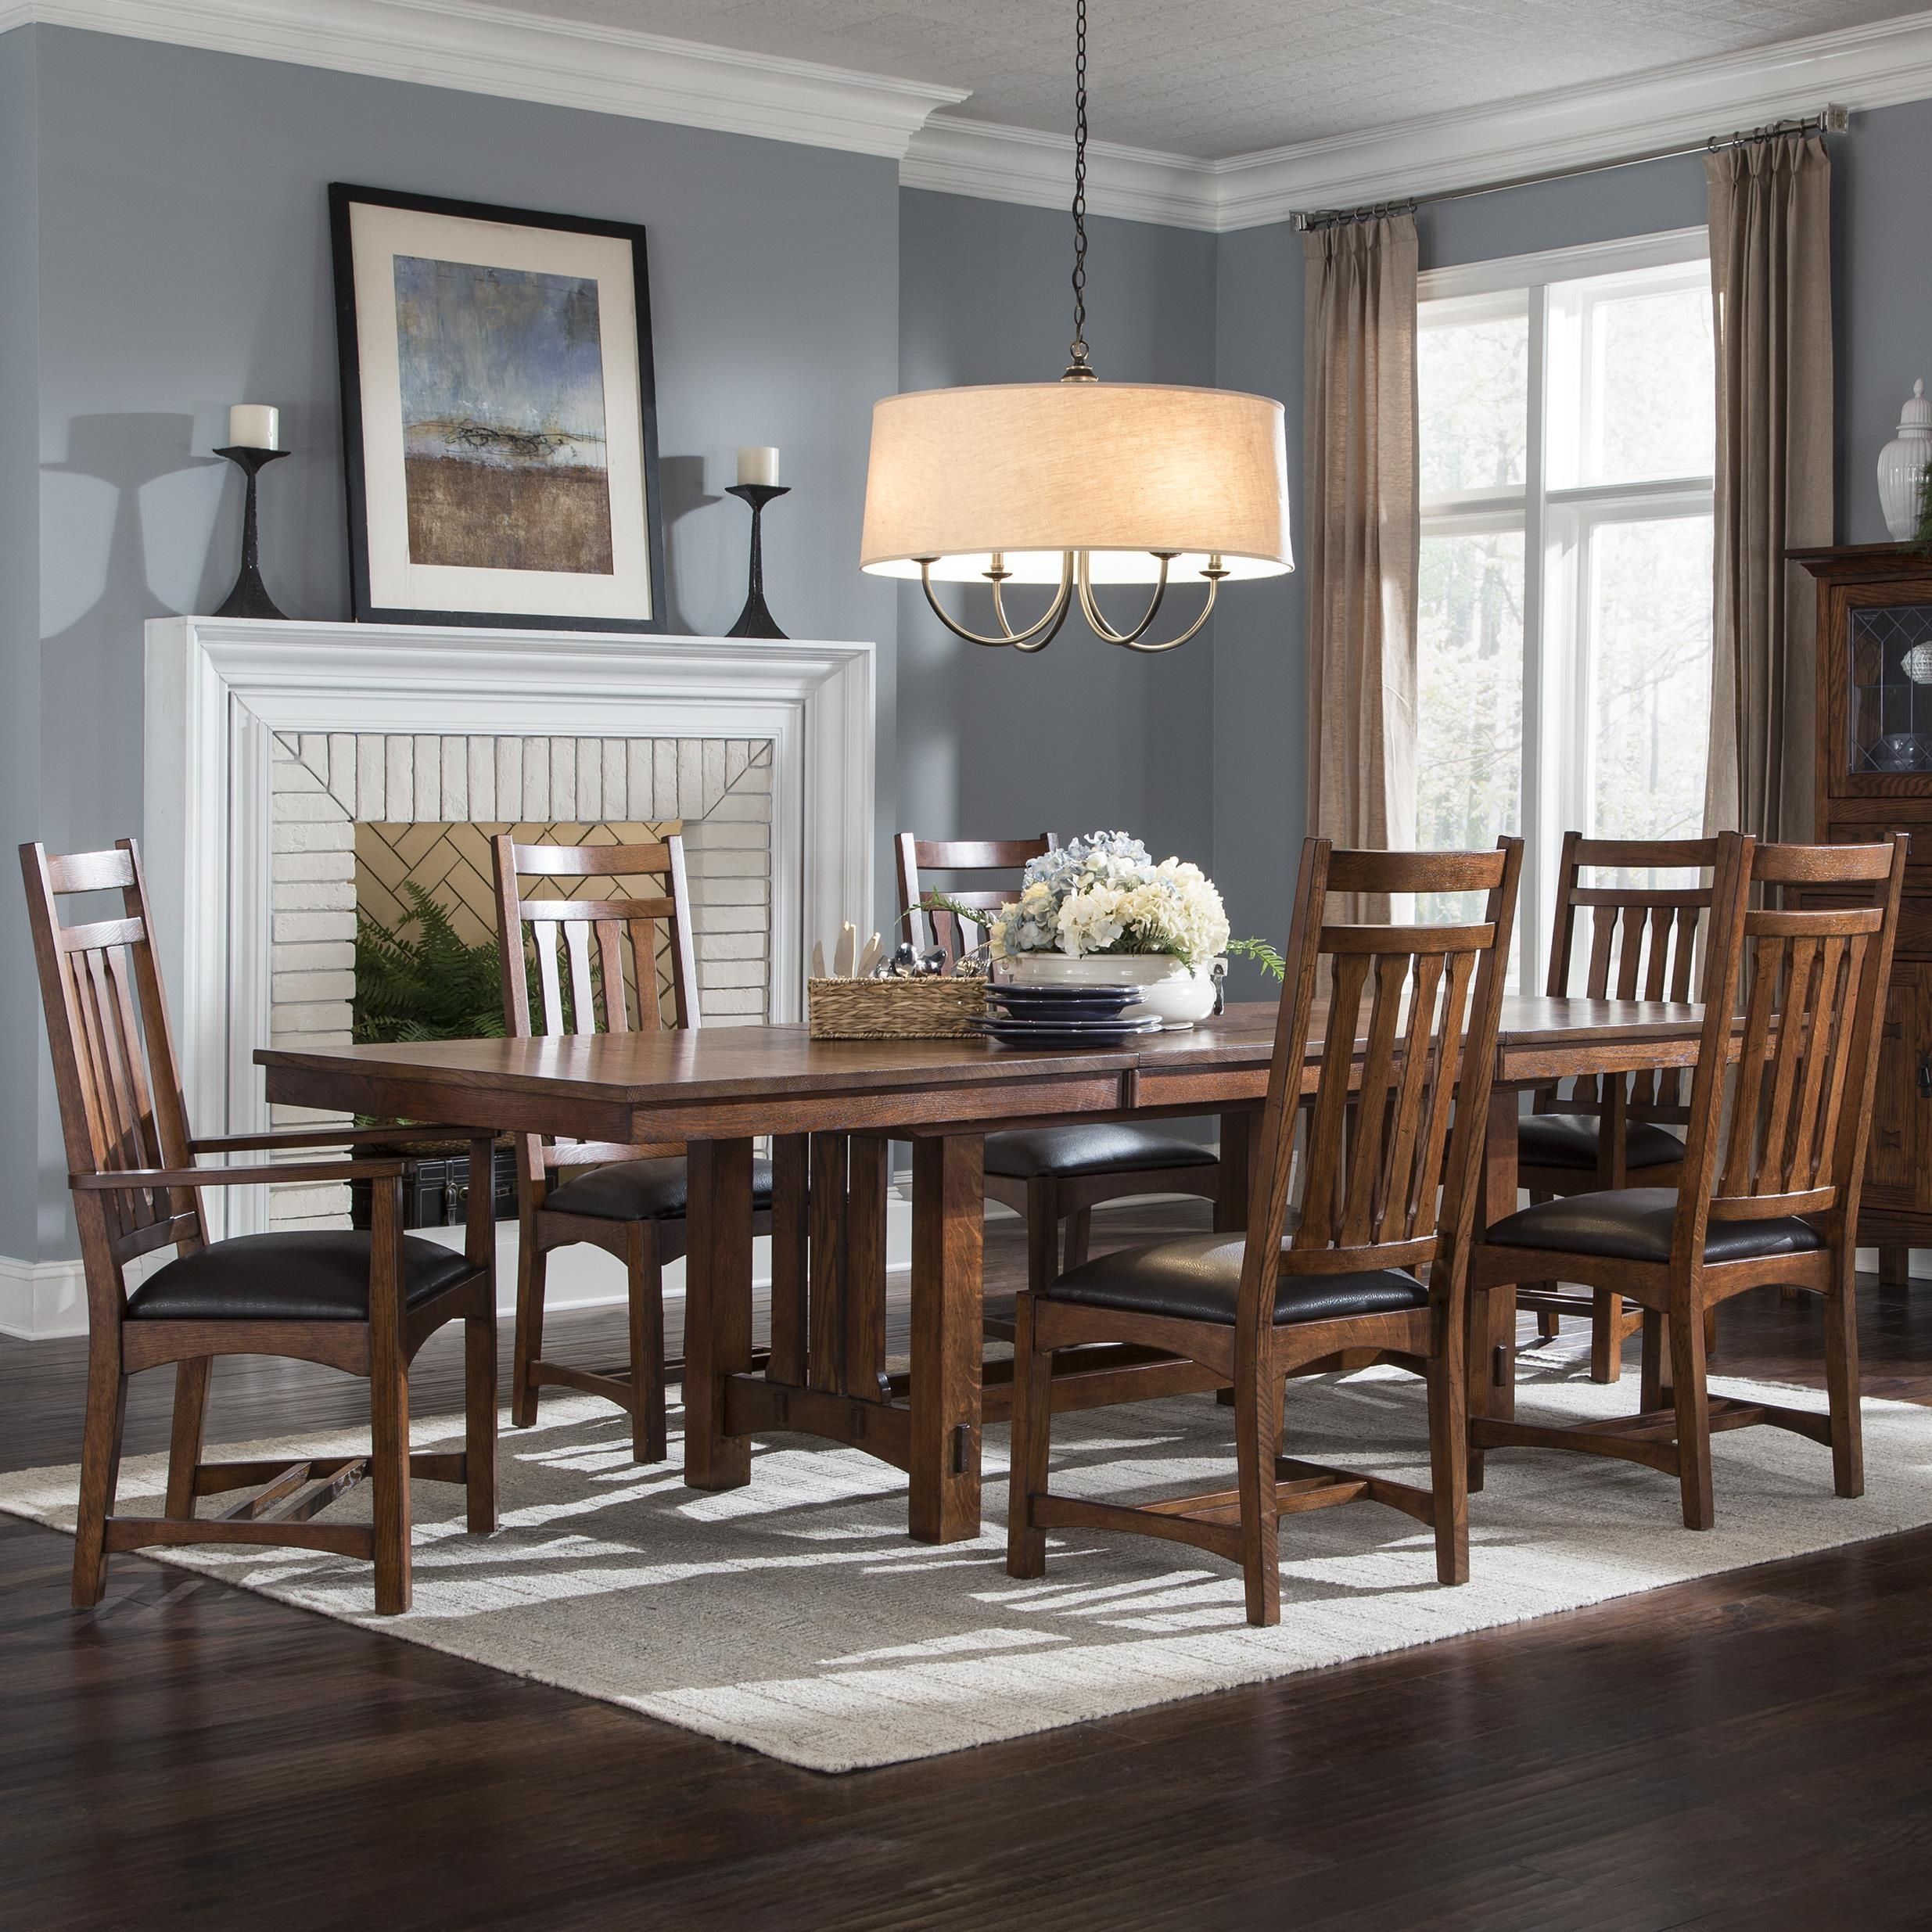 Vfm Signature Oak Park 7 Piece Dining Set With Slat Back Chairs Regarding Most Recent Craftsman 7 Piece Rectangular Extension Dining Sets With Arm & Uph Side Chairs (Photo 13 of 20)